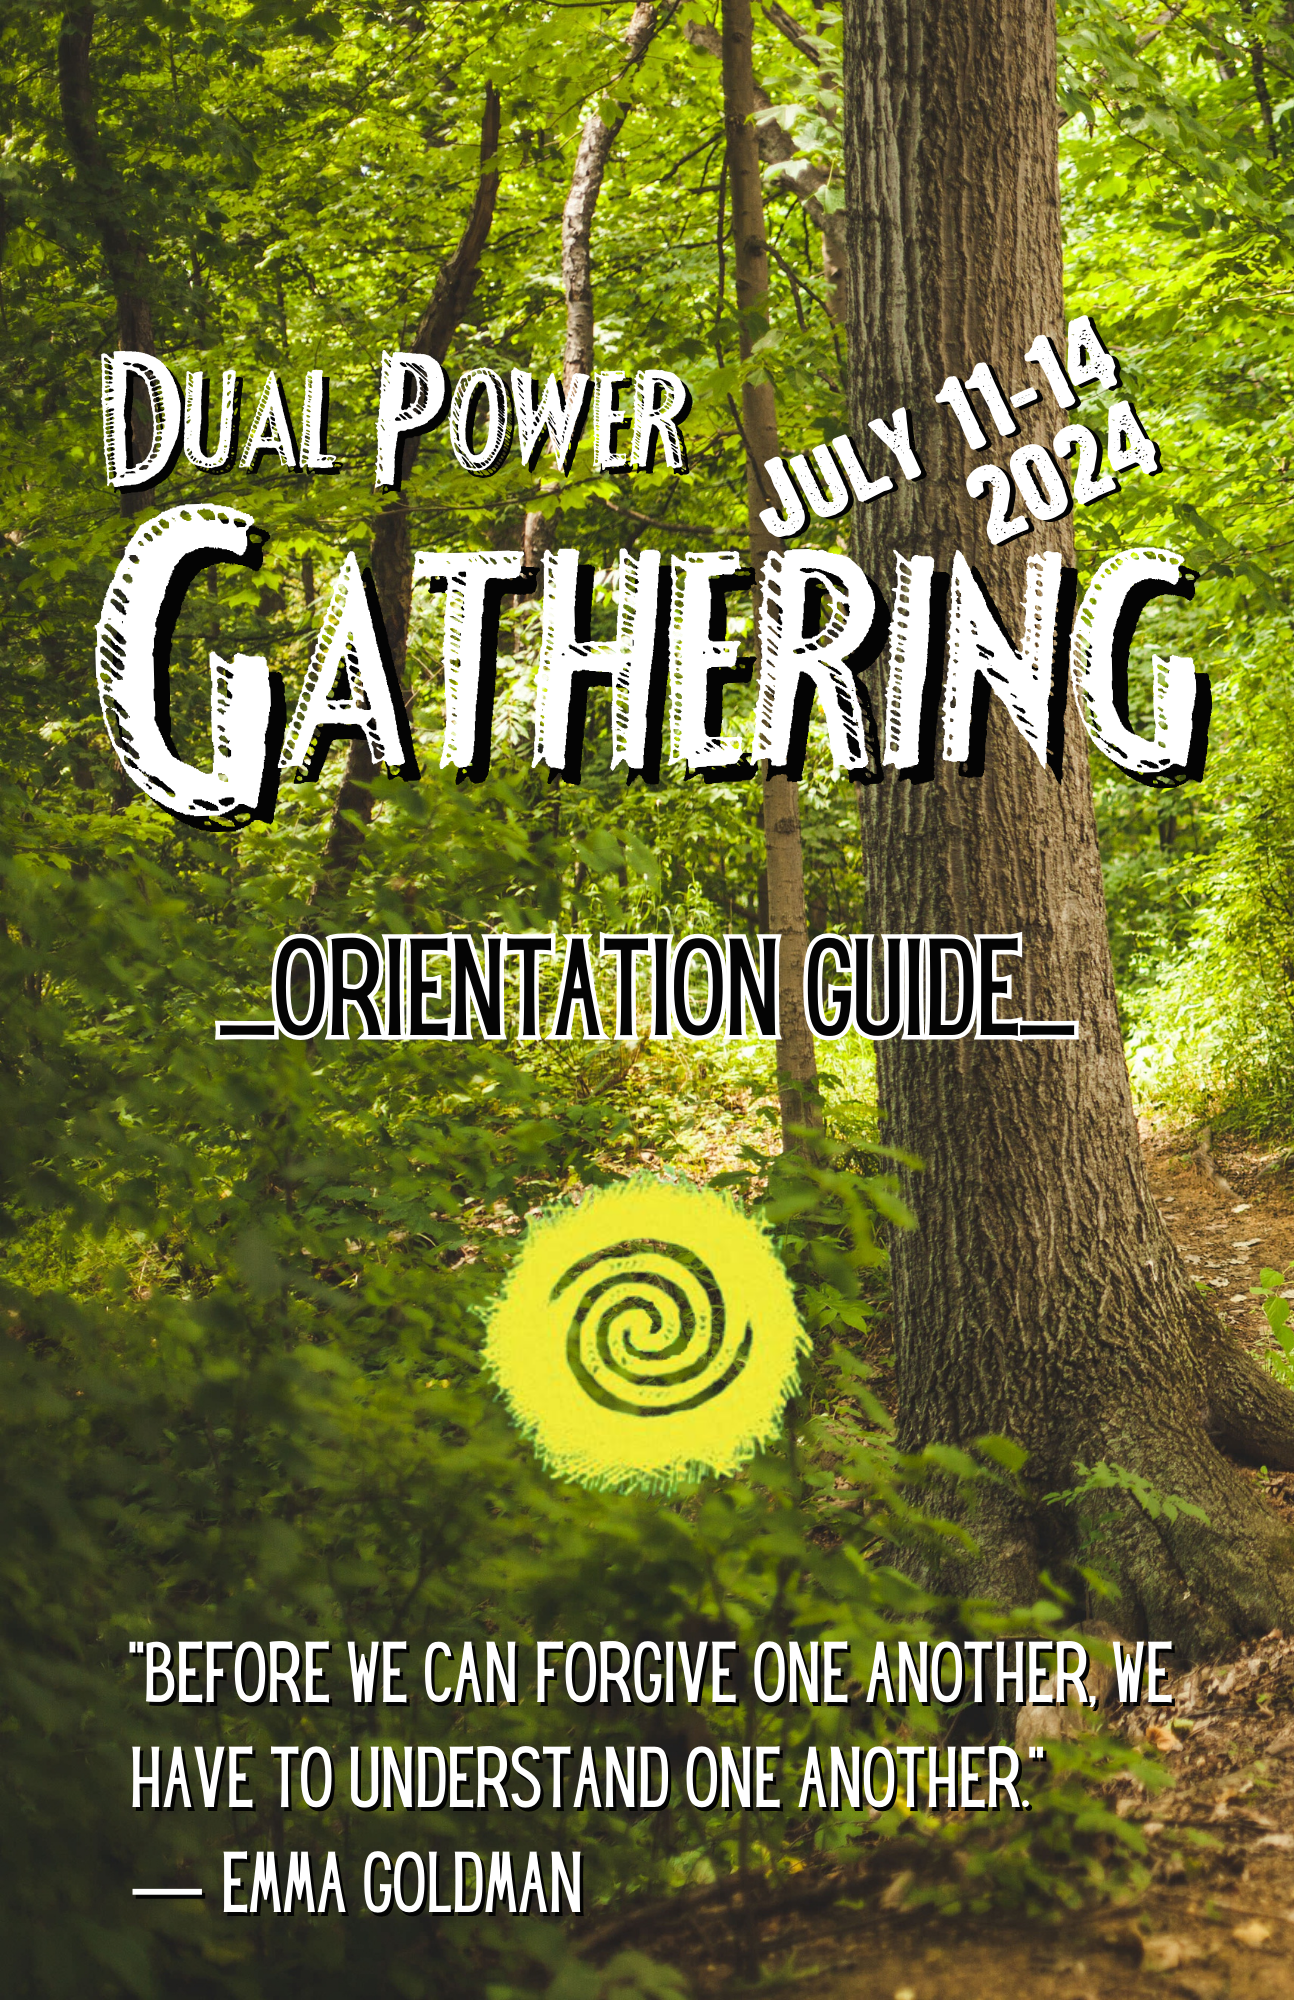 Title is Dual Pwoer Gathering, Jully 11-14 2024 Orientation Guide. A quote of the bottom read "Before we can forgive one another, we have to understand one another." -- Emma Goldman. Text is superimposed on a forest background image.